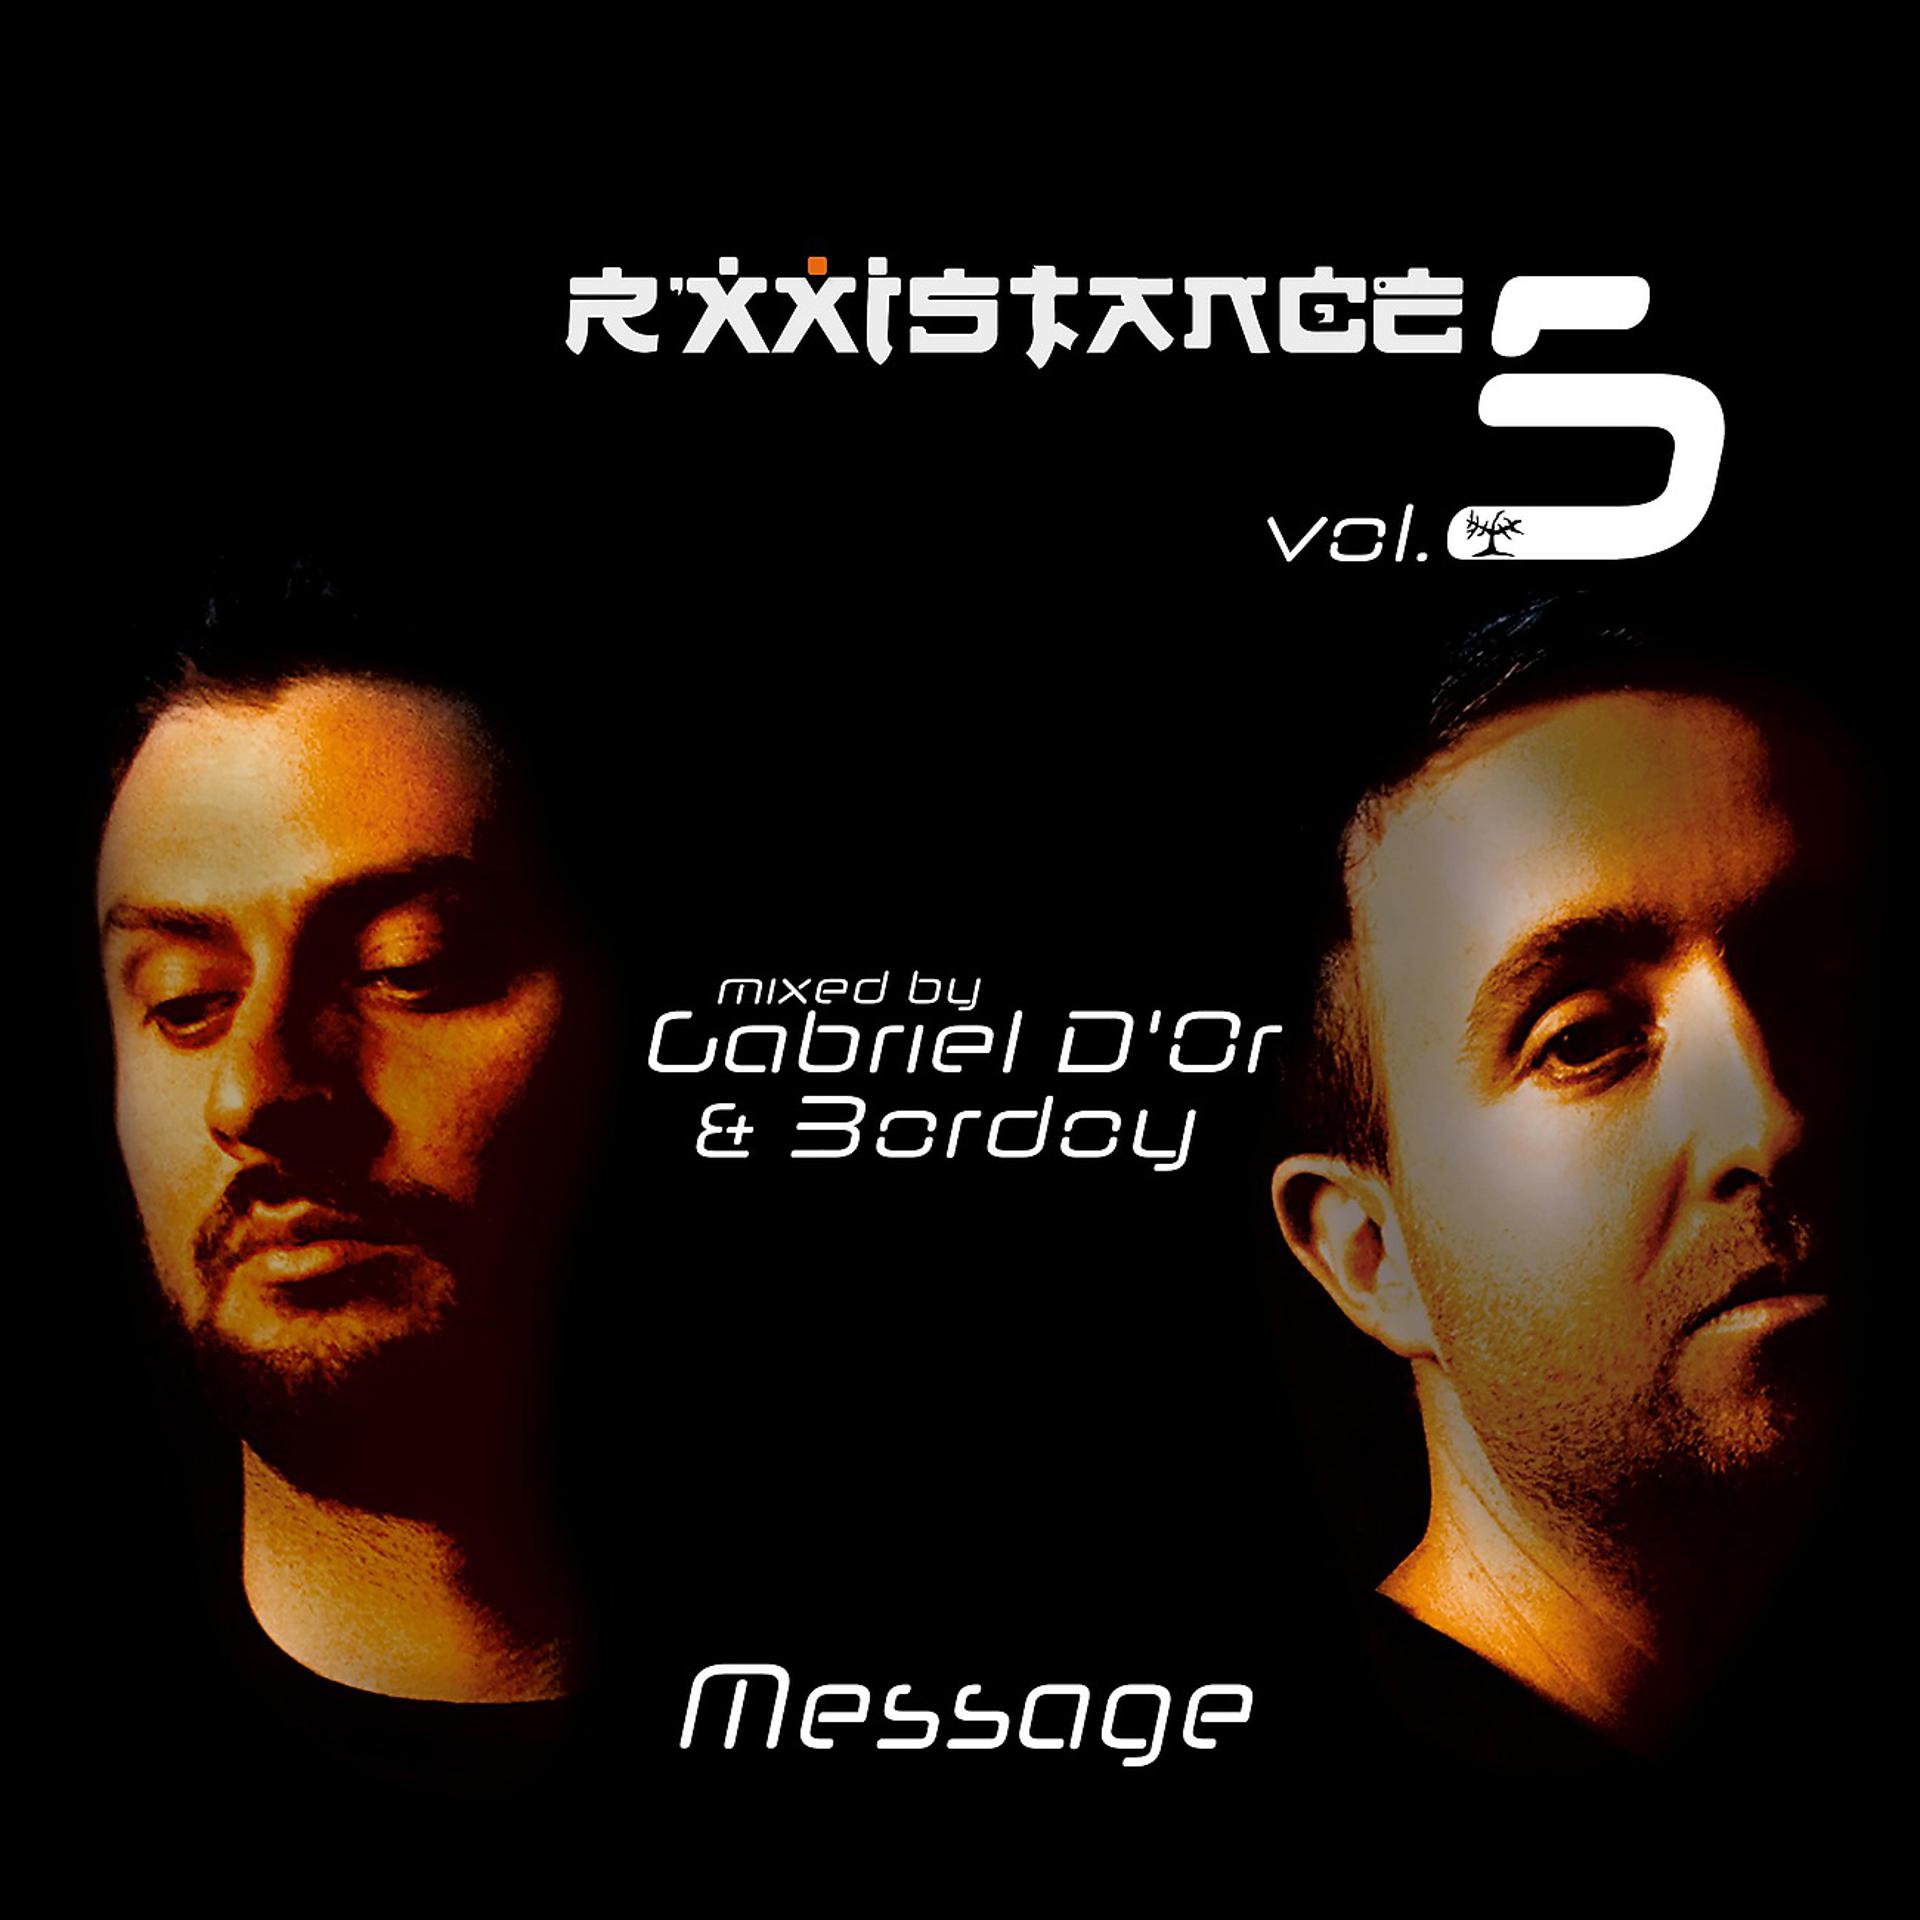 Постер альбома Rxxistance Vol. 5: Message (Mixed by Gabriel D'Or & Bordoy)